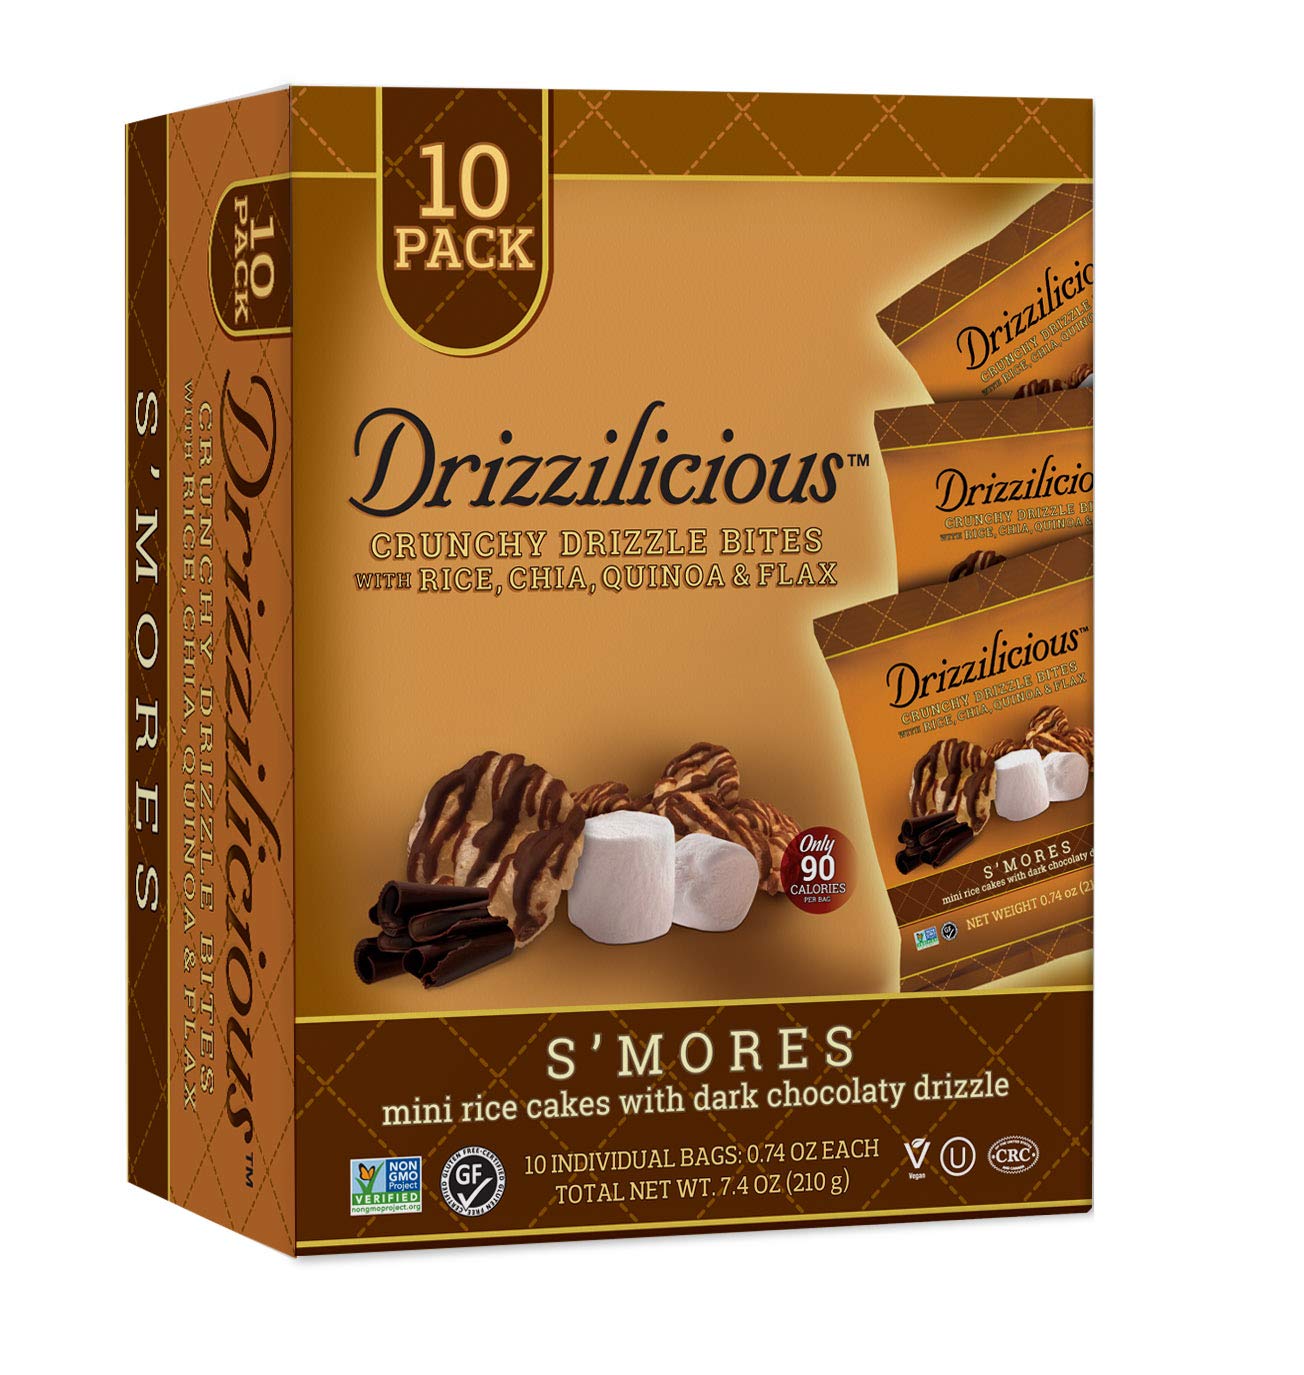 Drizzilicious S'mores Crunchy Drizzle Bites with Rice, Chia, Quinoa & Flax 7.4 oz